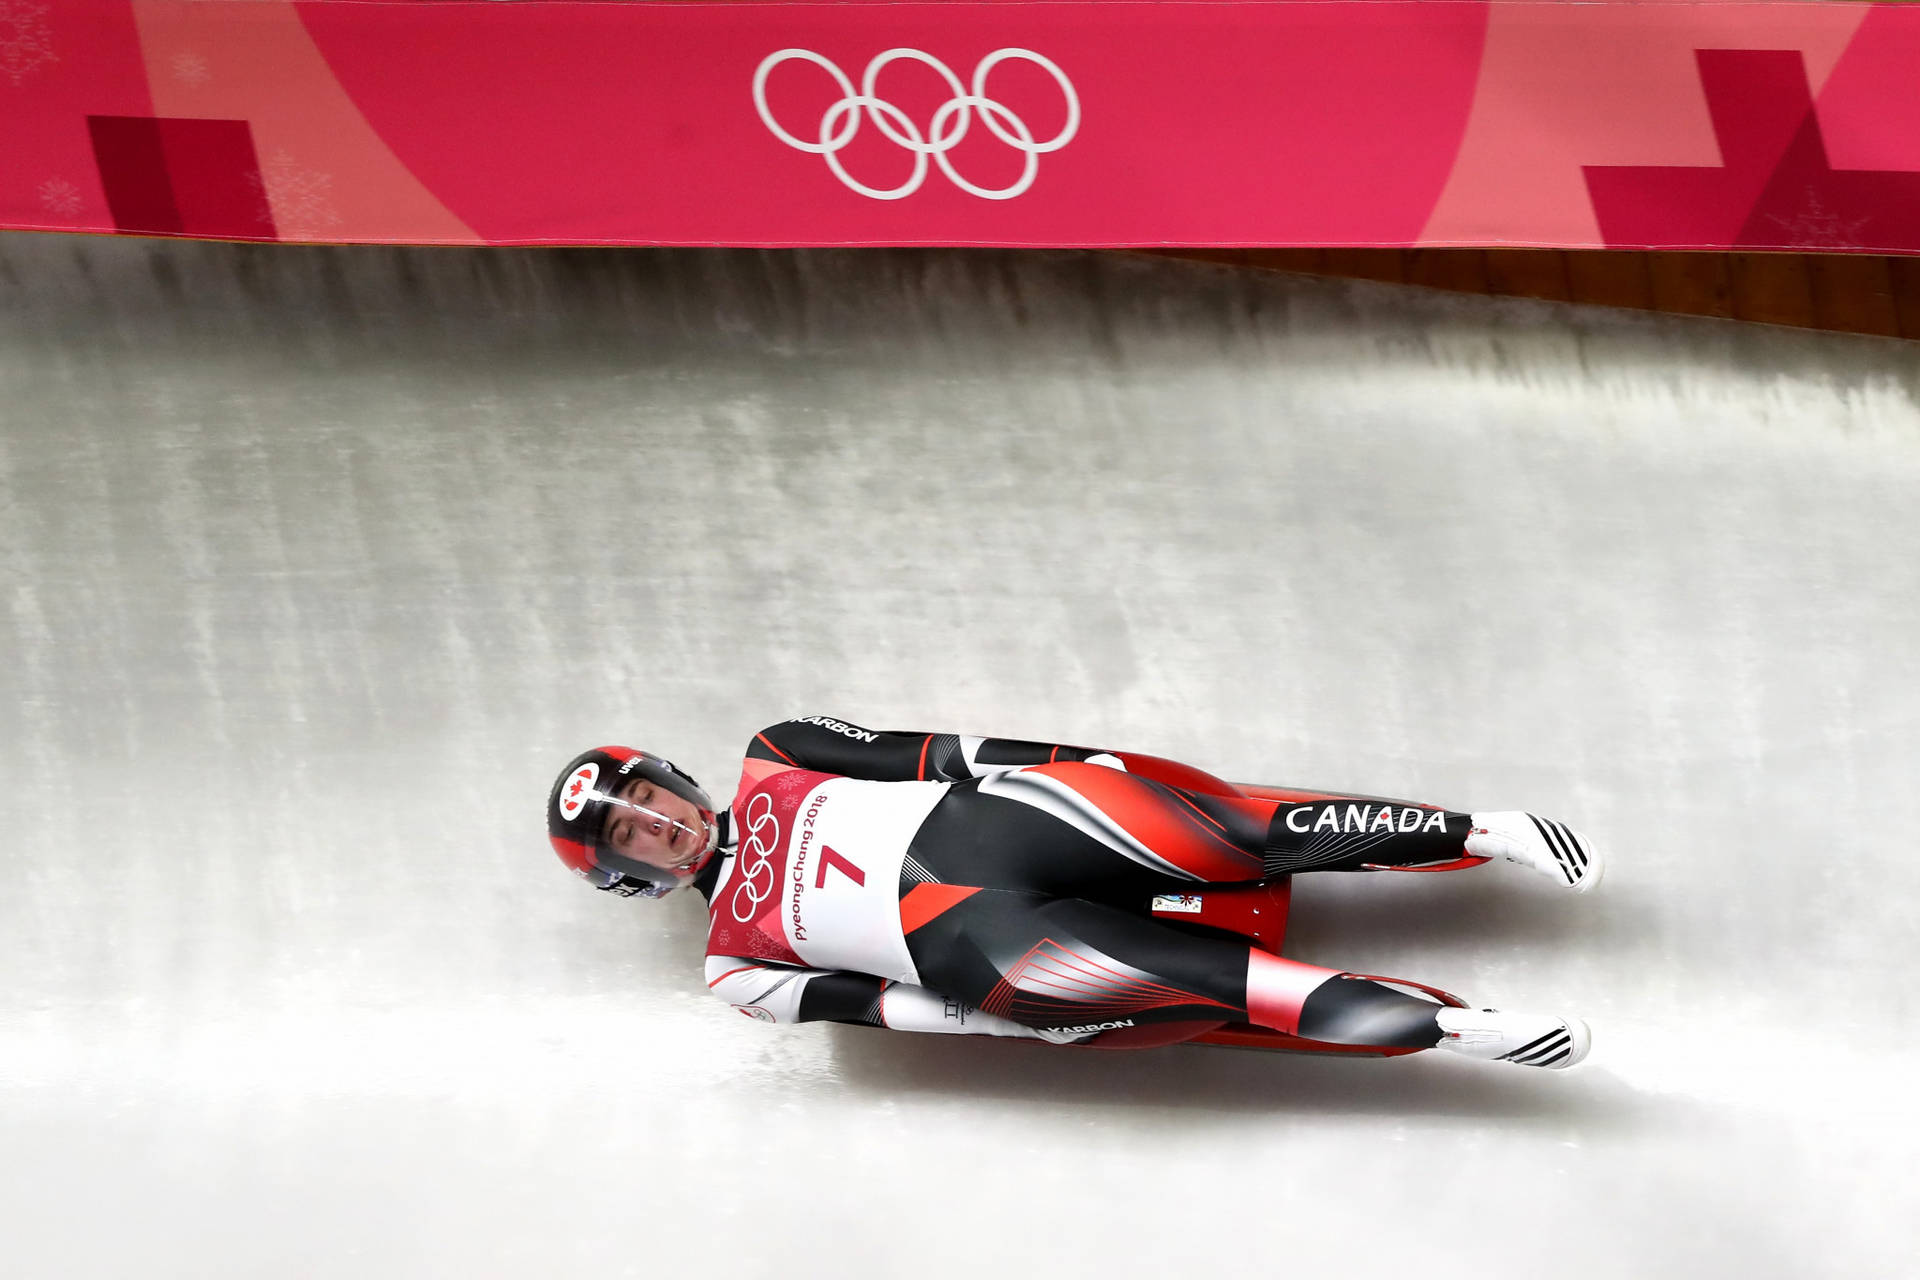 Canada Luge Team In Winter Olympics Wallpaper